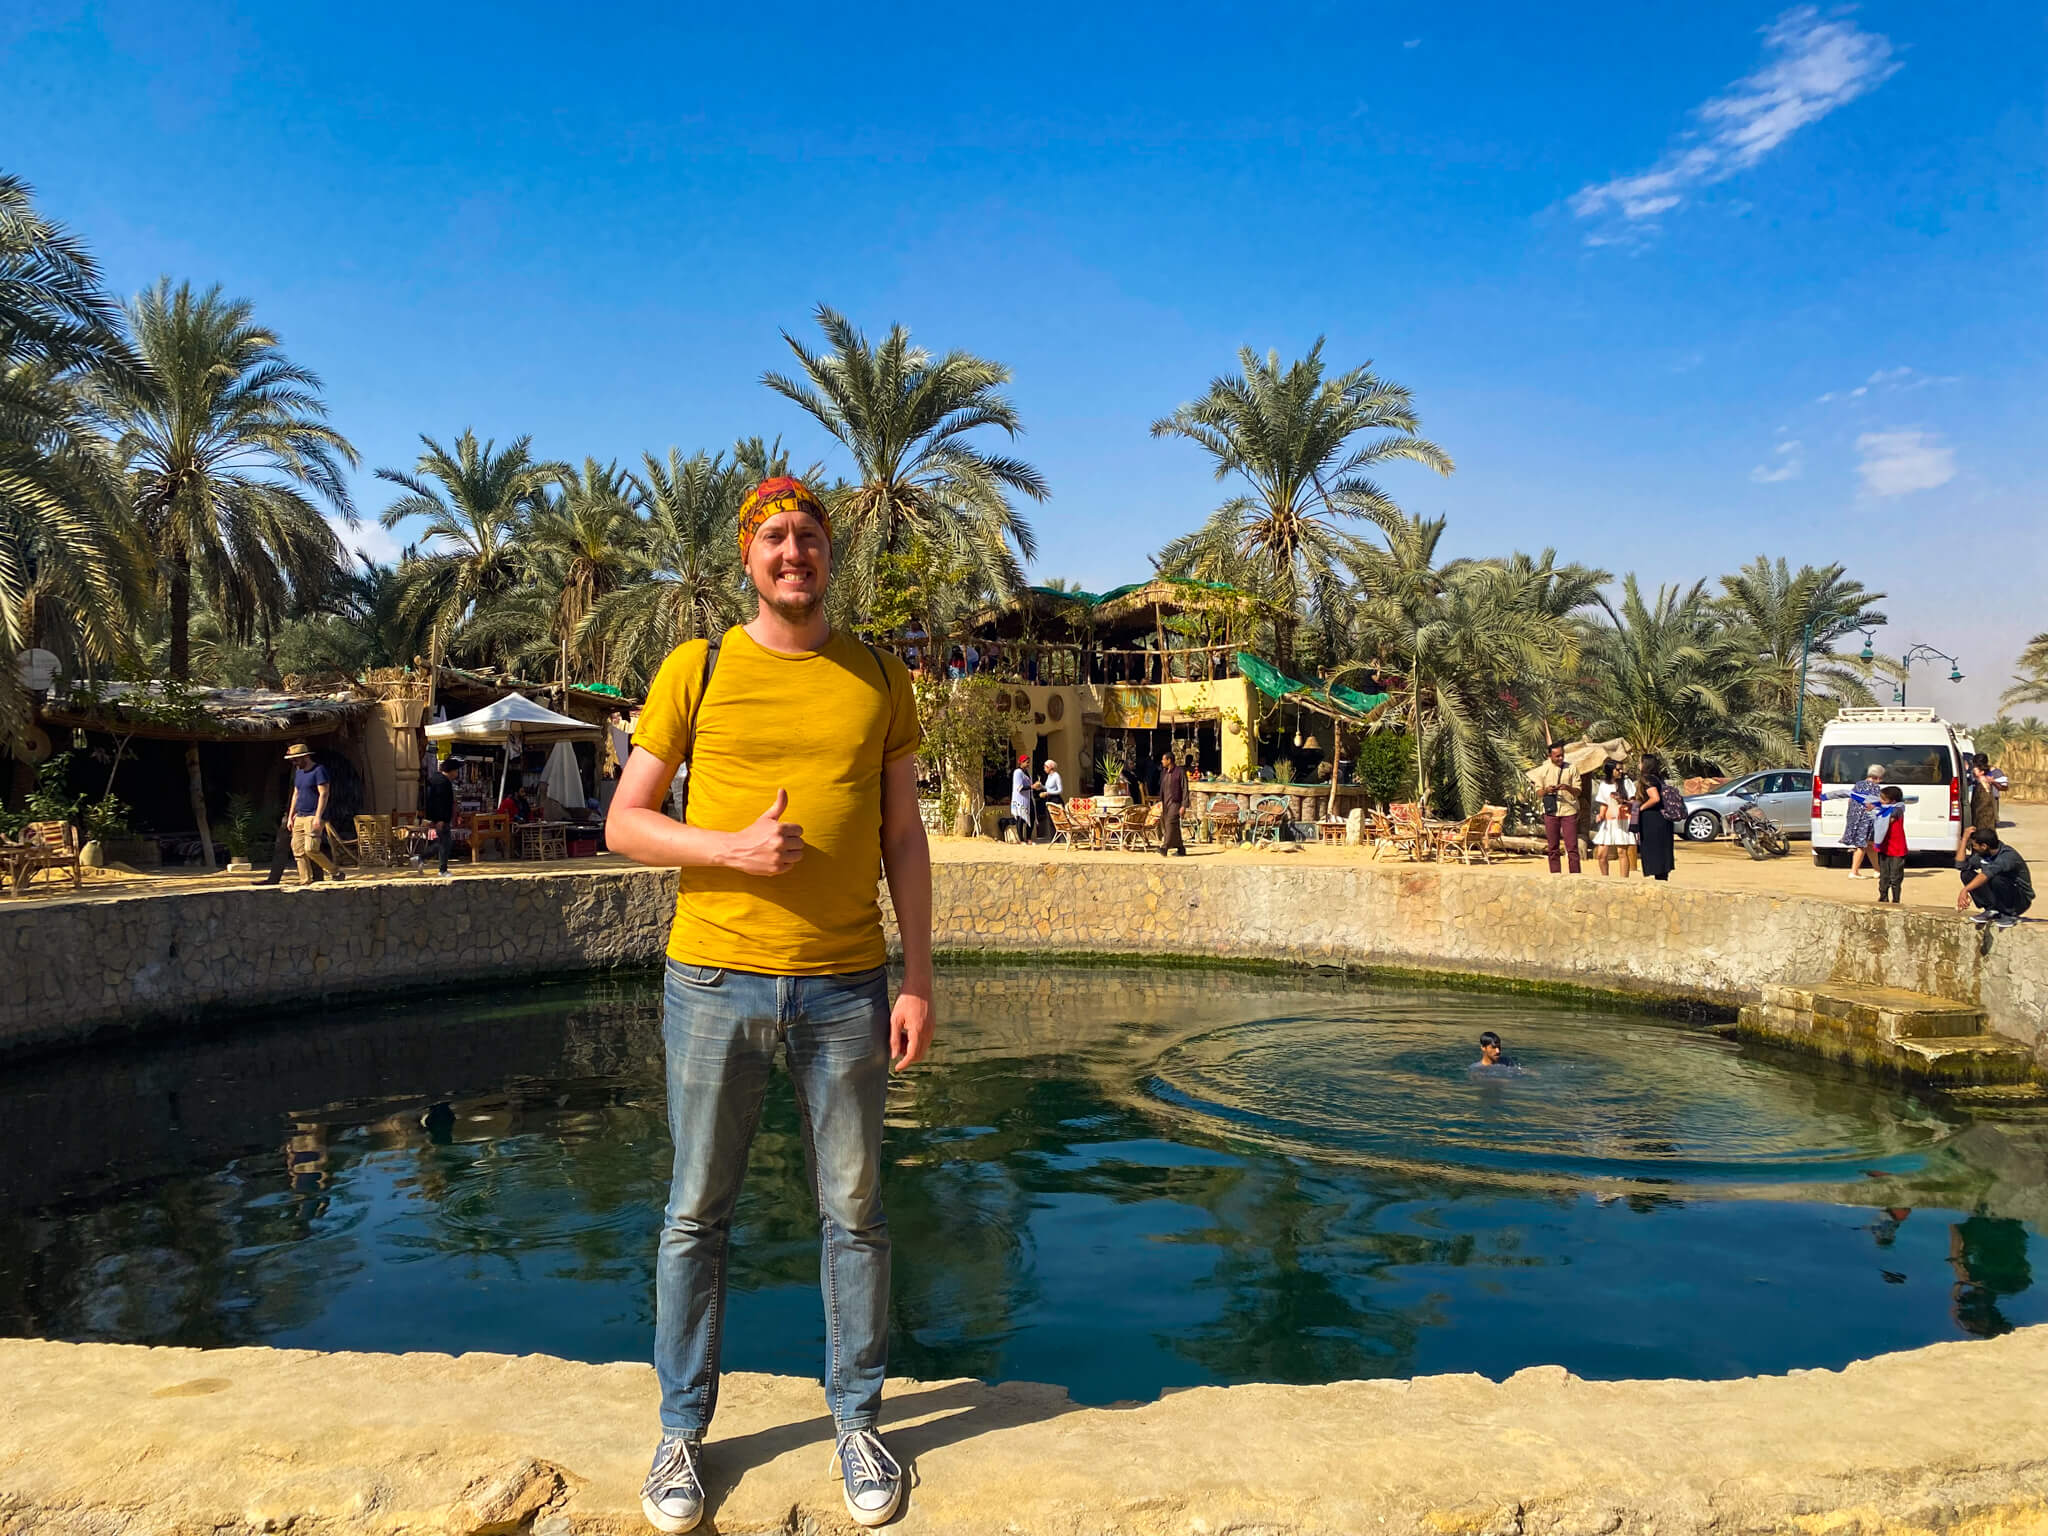 Me, standing in front of a concrete pool with rubbish floating in it and palm trees in the background.